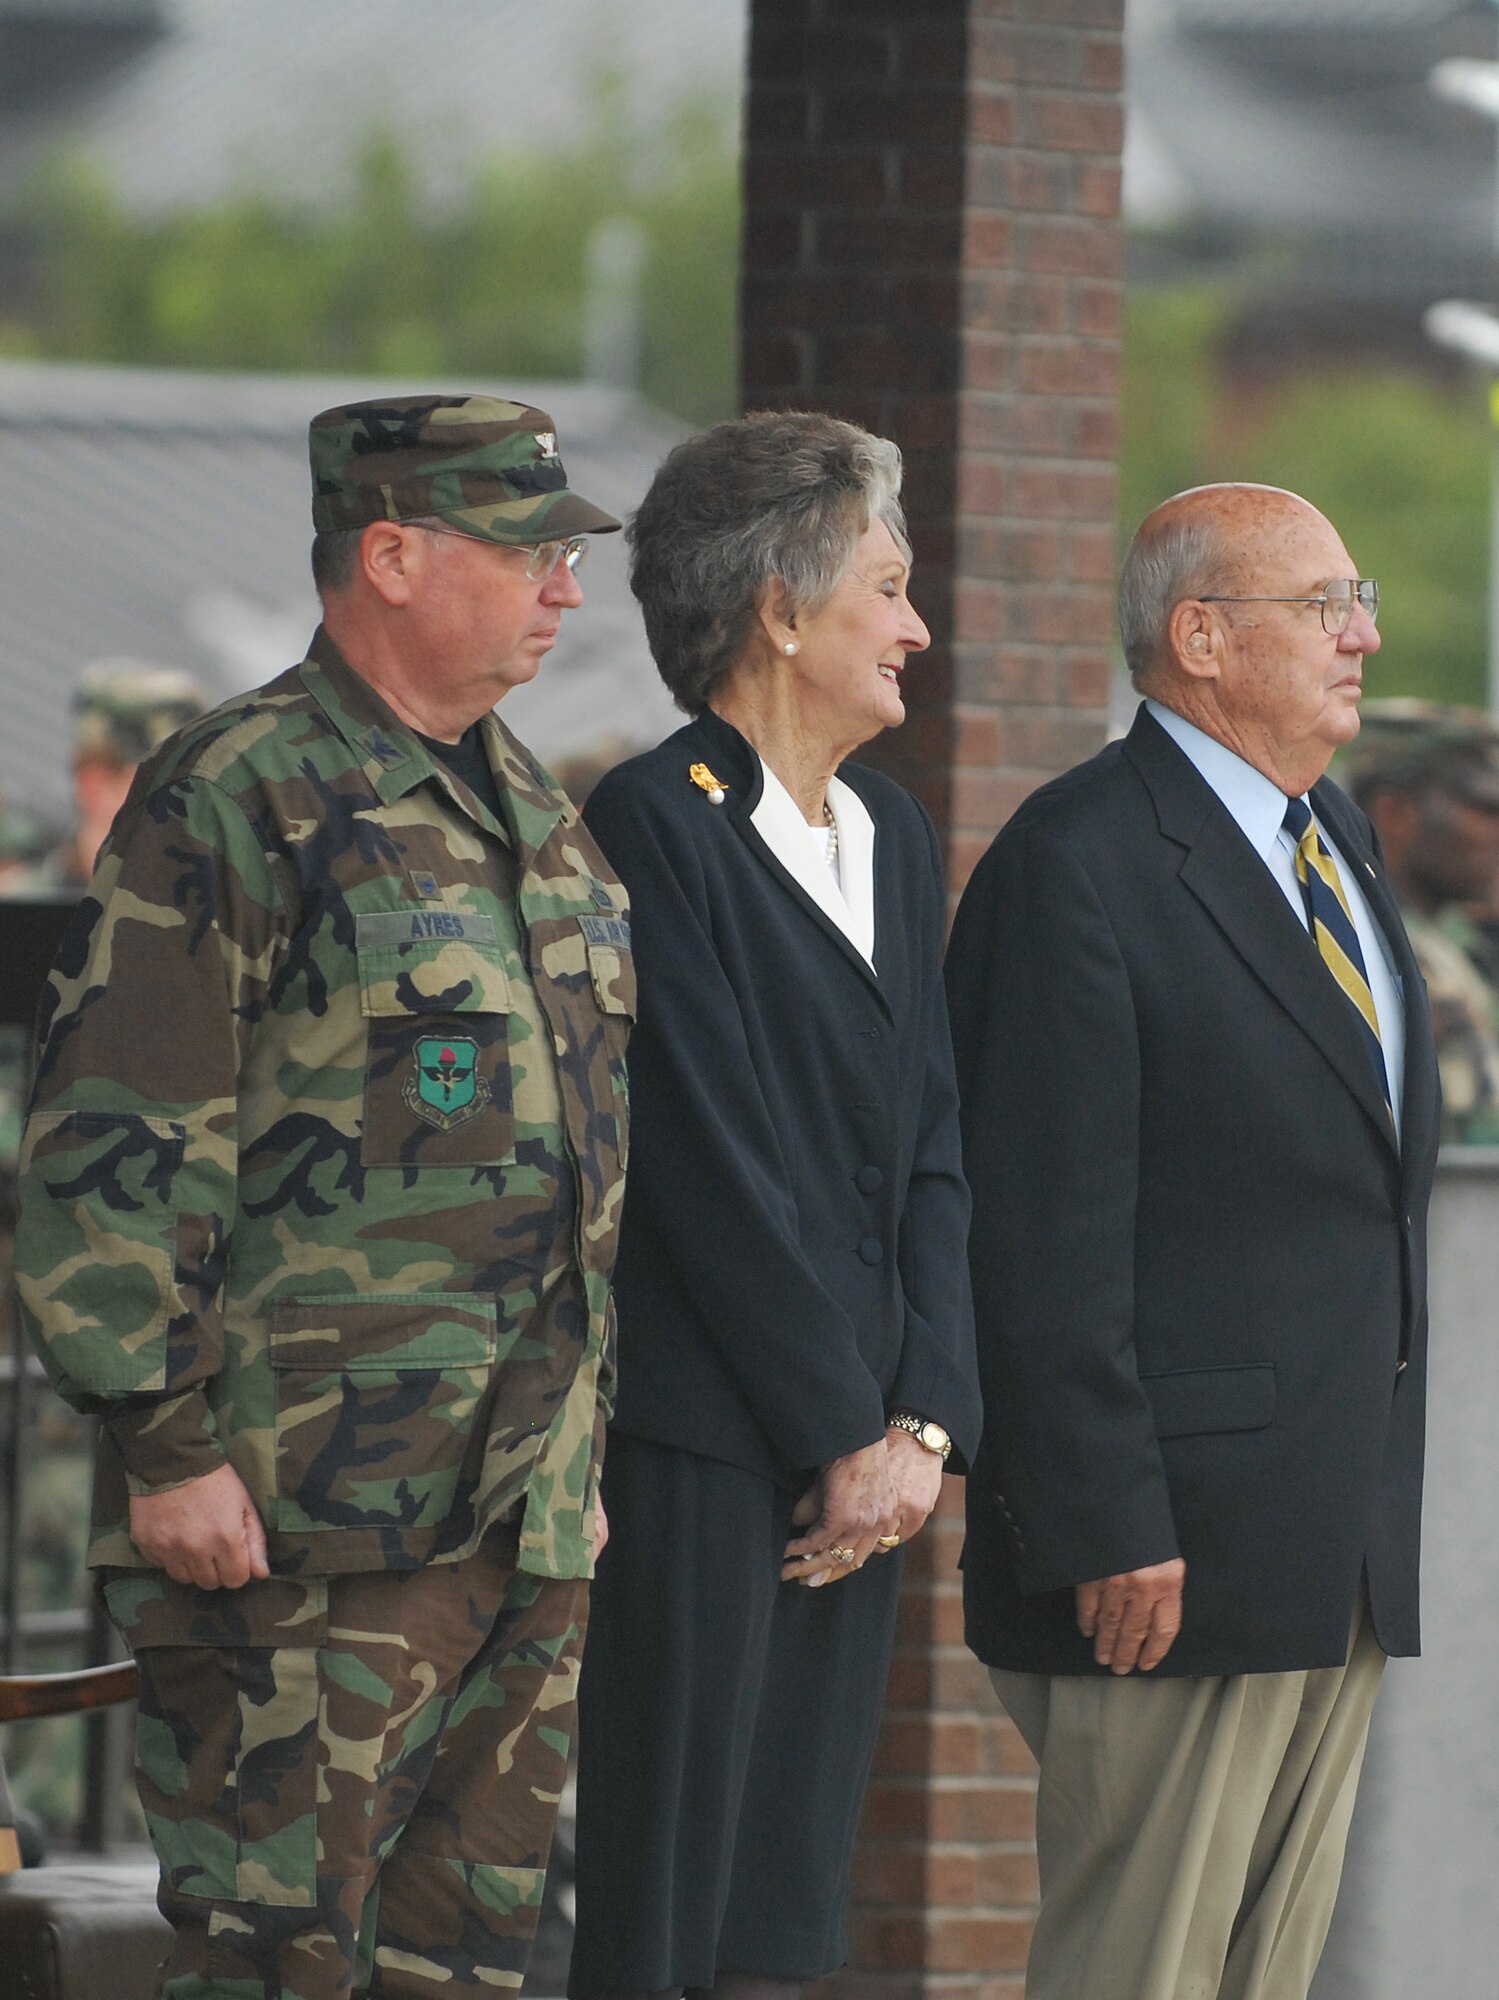 From left to right, Col. Richard Ayres, 17th Training Wing Commander; JoAnne Powell and retired Col. Charlie Powell stand at attention during the playing of the Armed Forces Medley Sept. 11. Colonel and JoAnne Powell were recognized for their continuing service and dedication to the people of Goodfellow Air Force Base. (U.S. Air Force photo by Tech. Sgt. Gina O’Bryan)